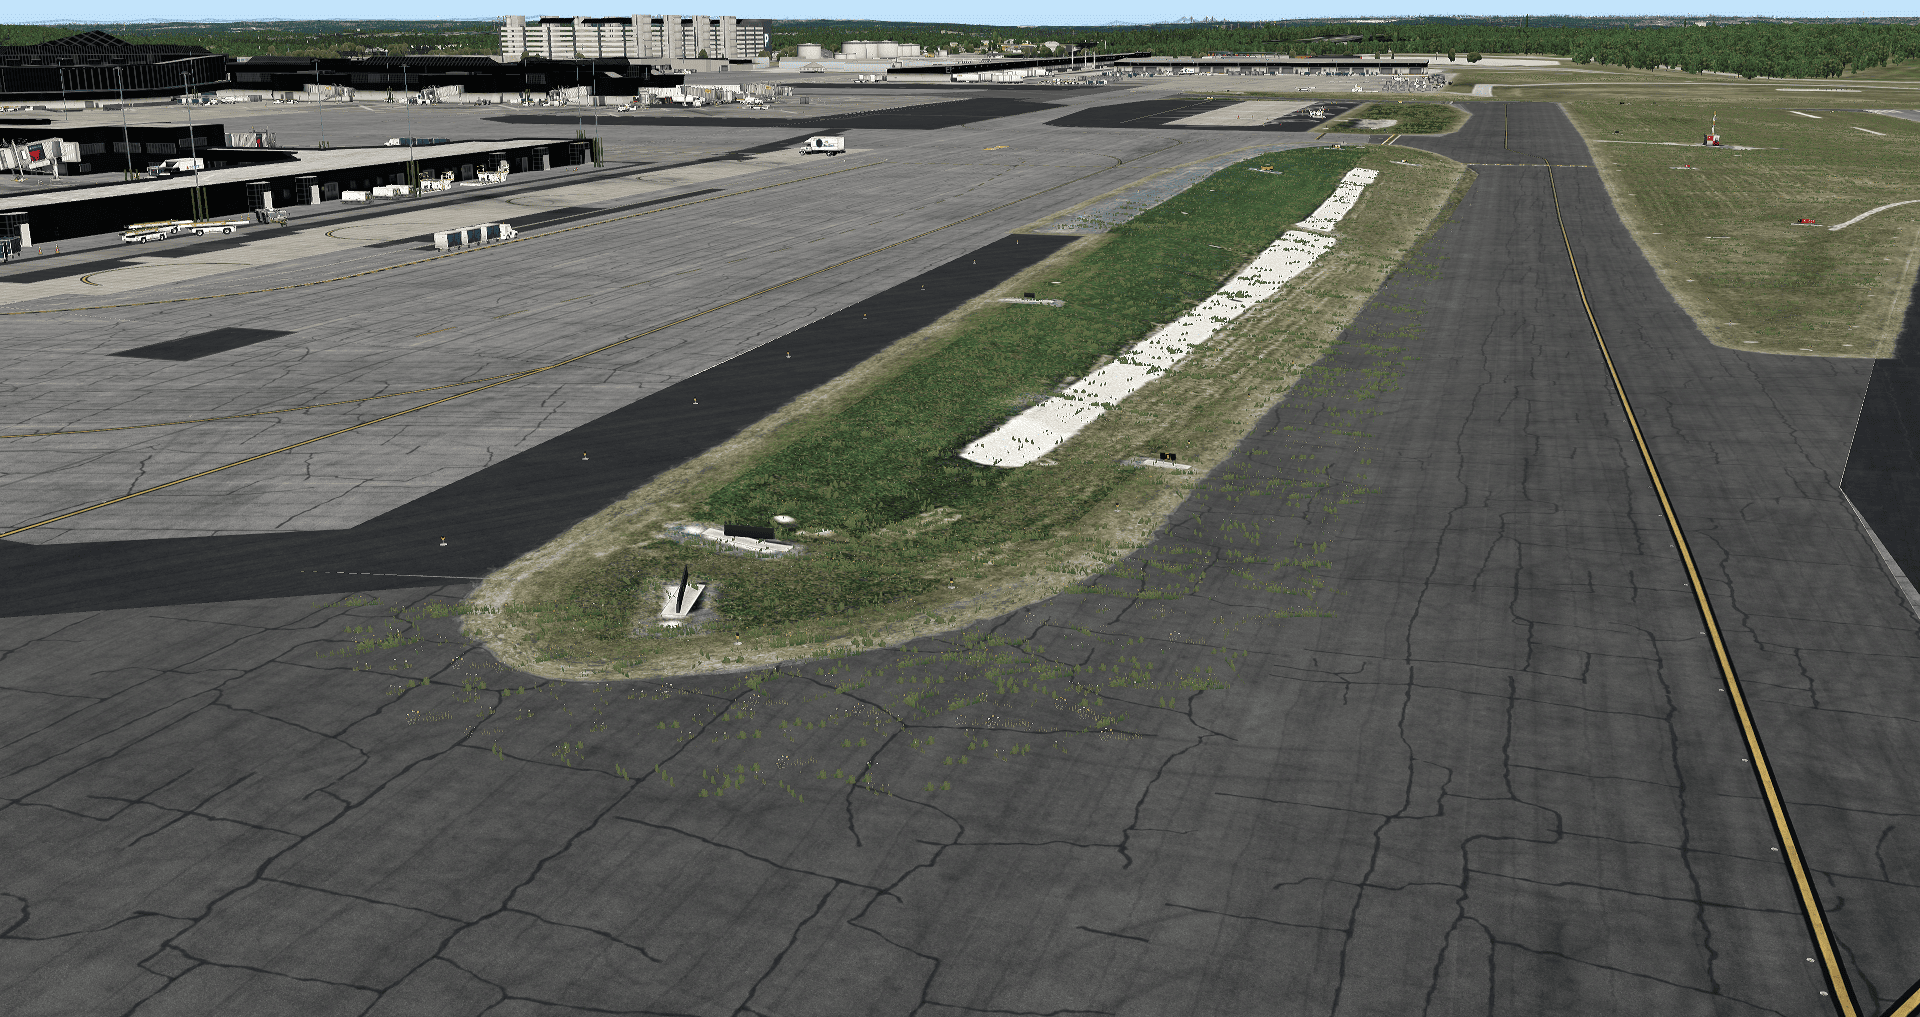 Review: Verticalsim Baltimore Professional for XP11 - Review, VerticalSim, X-Plane